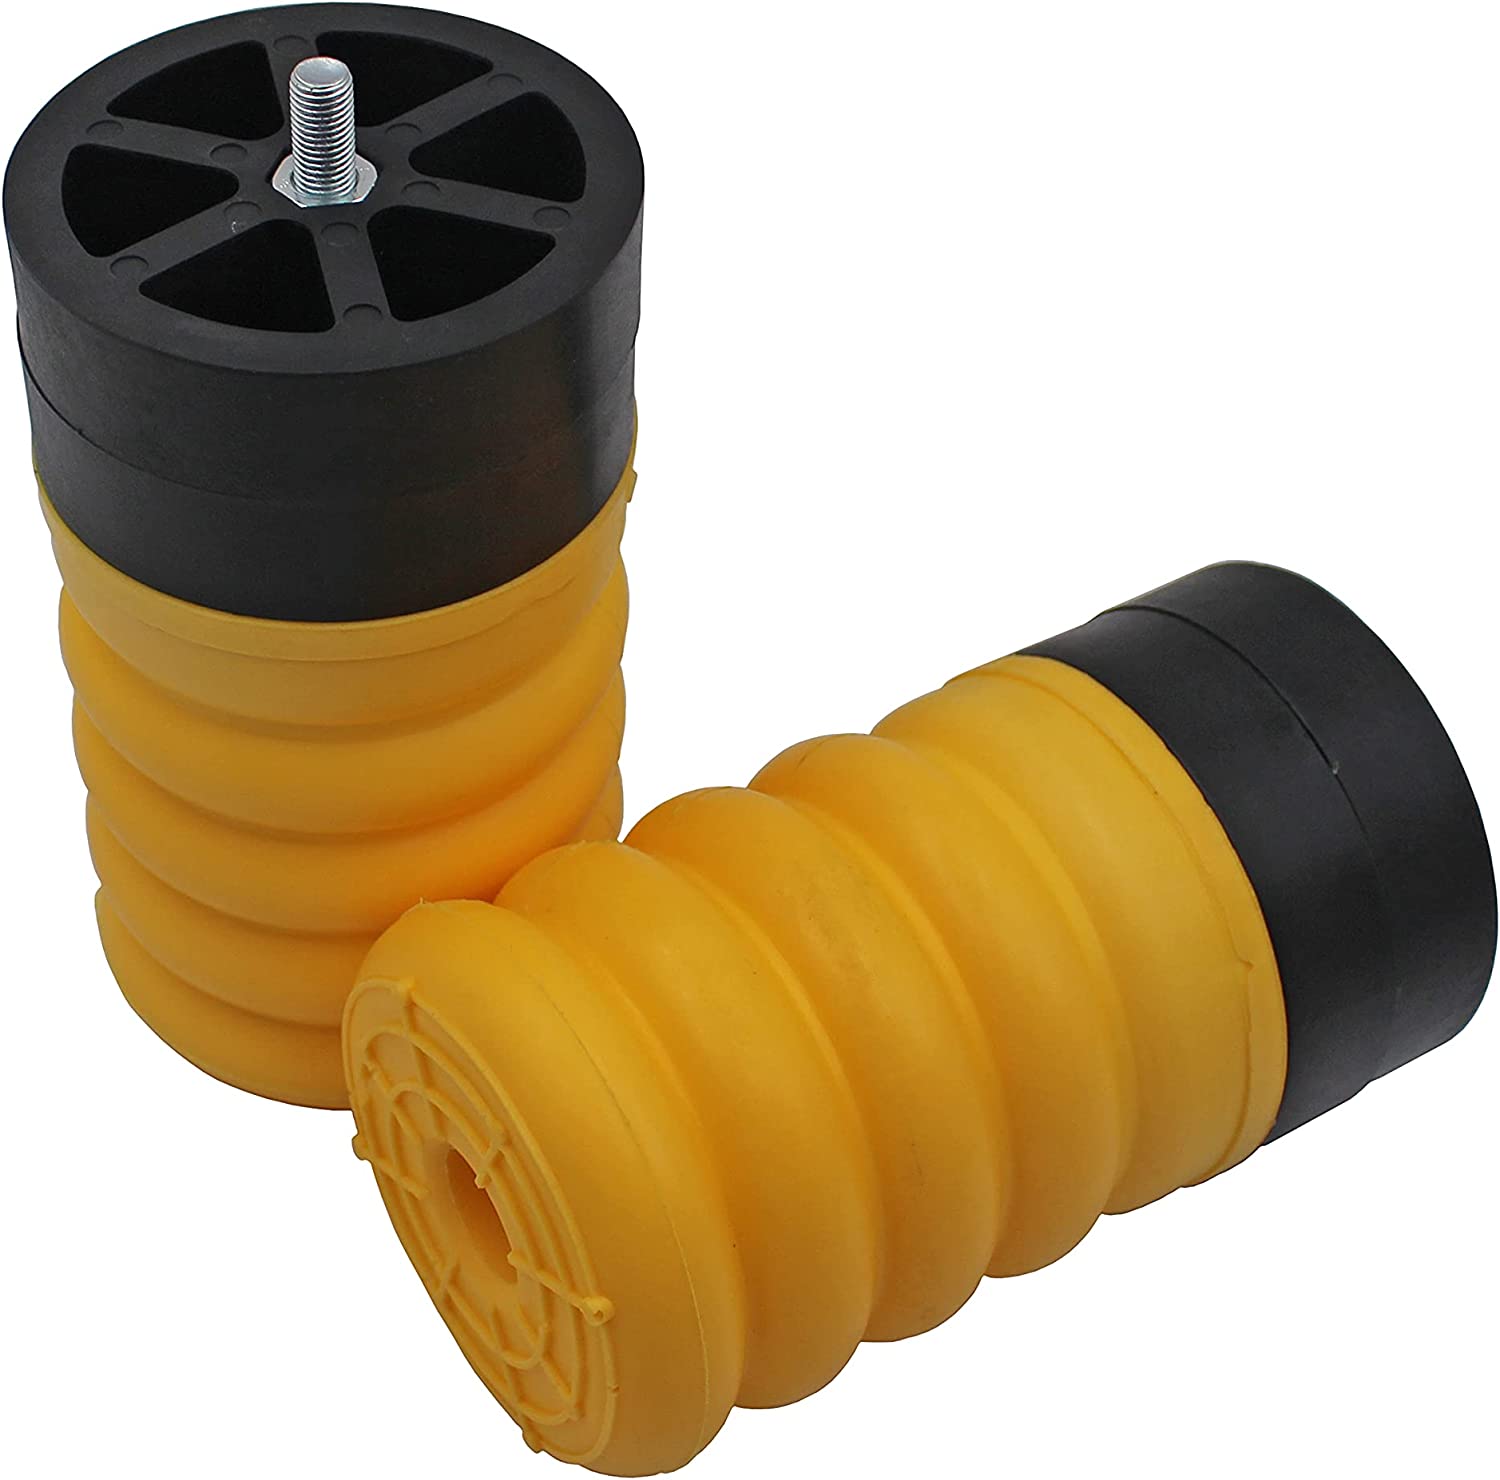 SSR-313-54 Suspension System Compatible with Dodge RAM ProMaster 1500,2500,3500 - Yellow